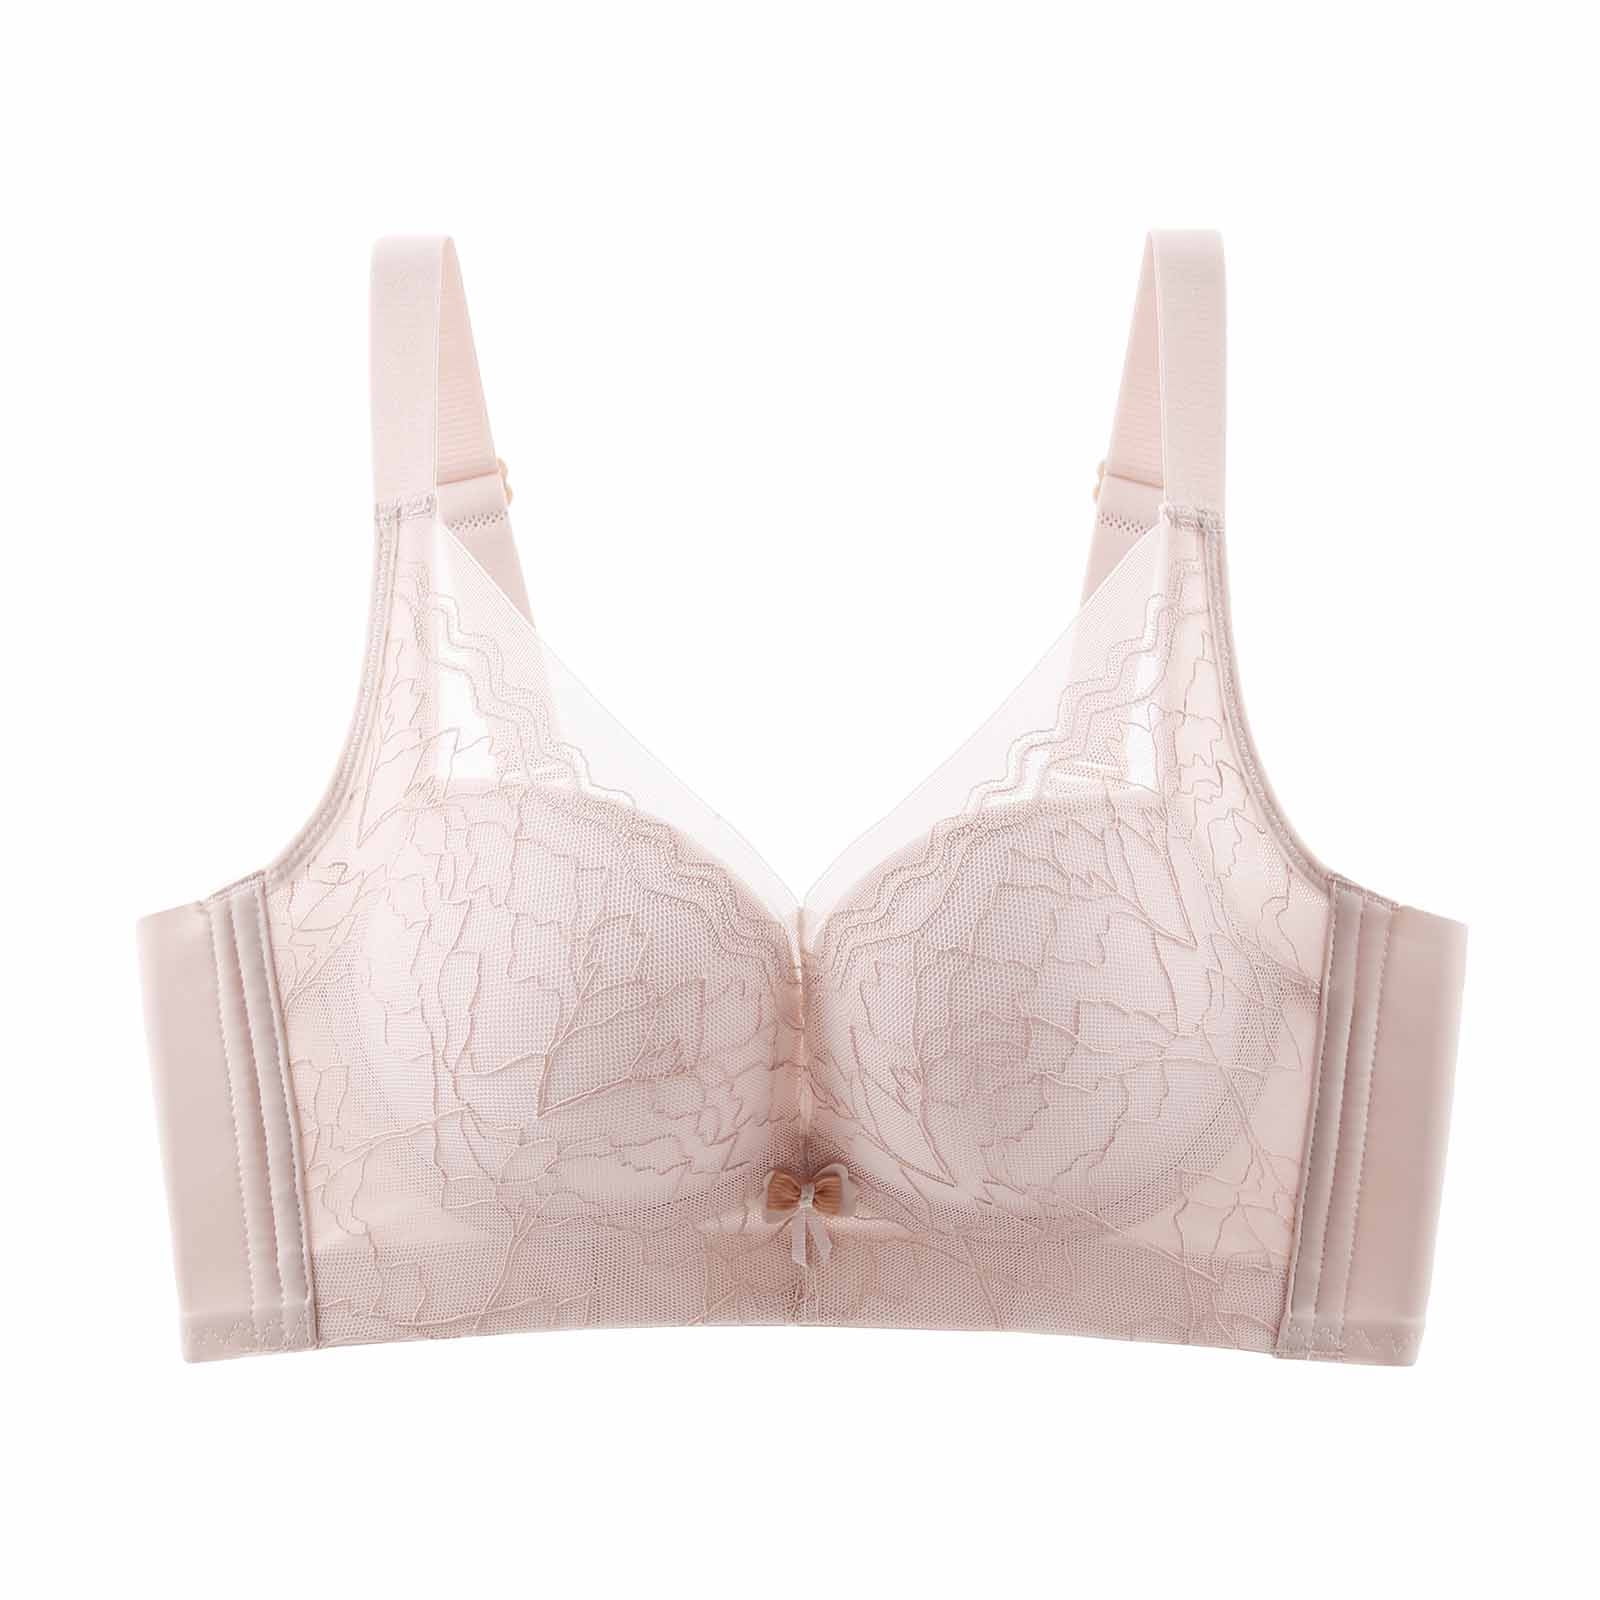 uublik Comfortable Bras for Women Push Up Sexy Soft Wirefree Everyday Bras  Pink 